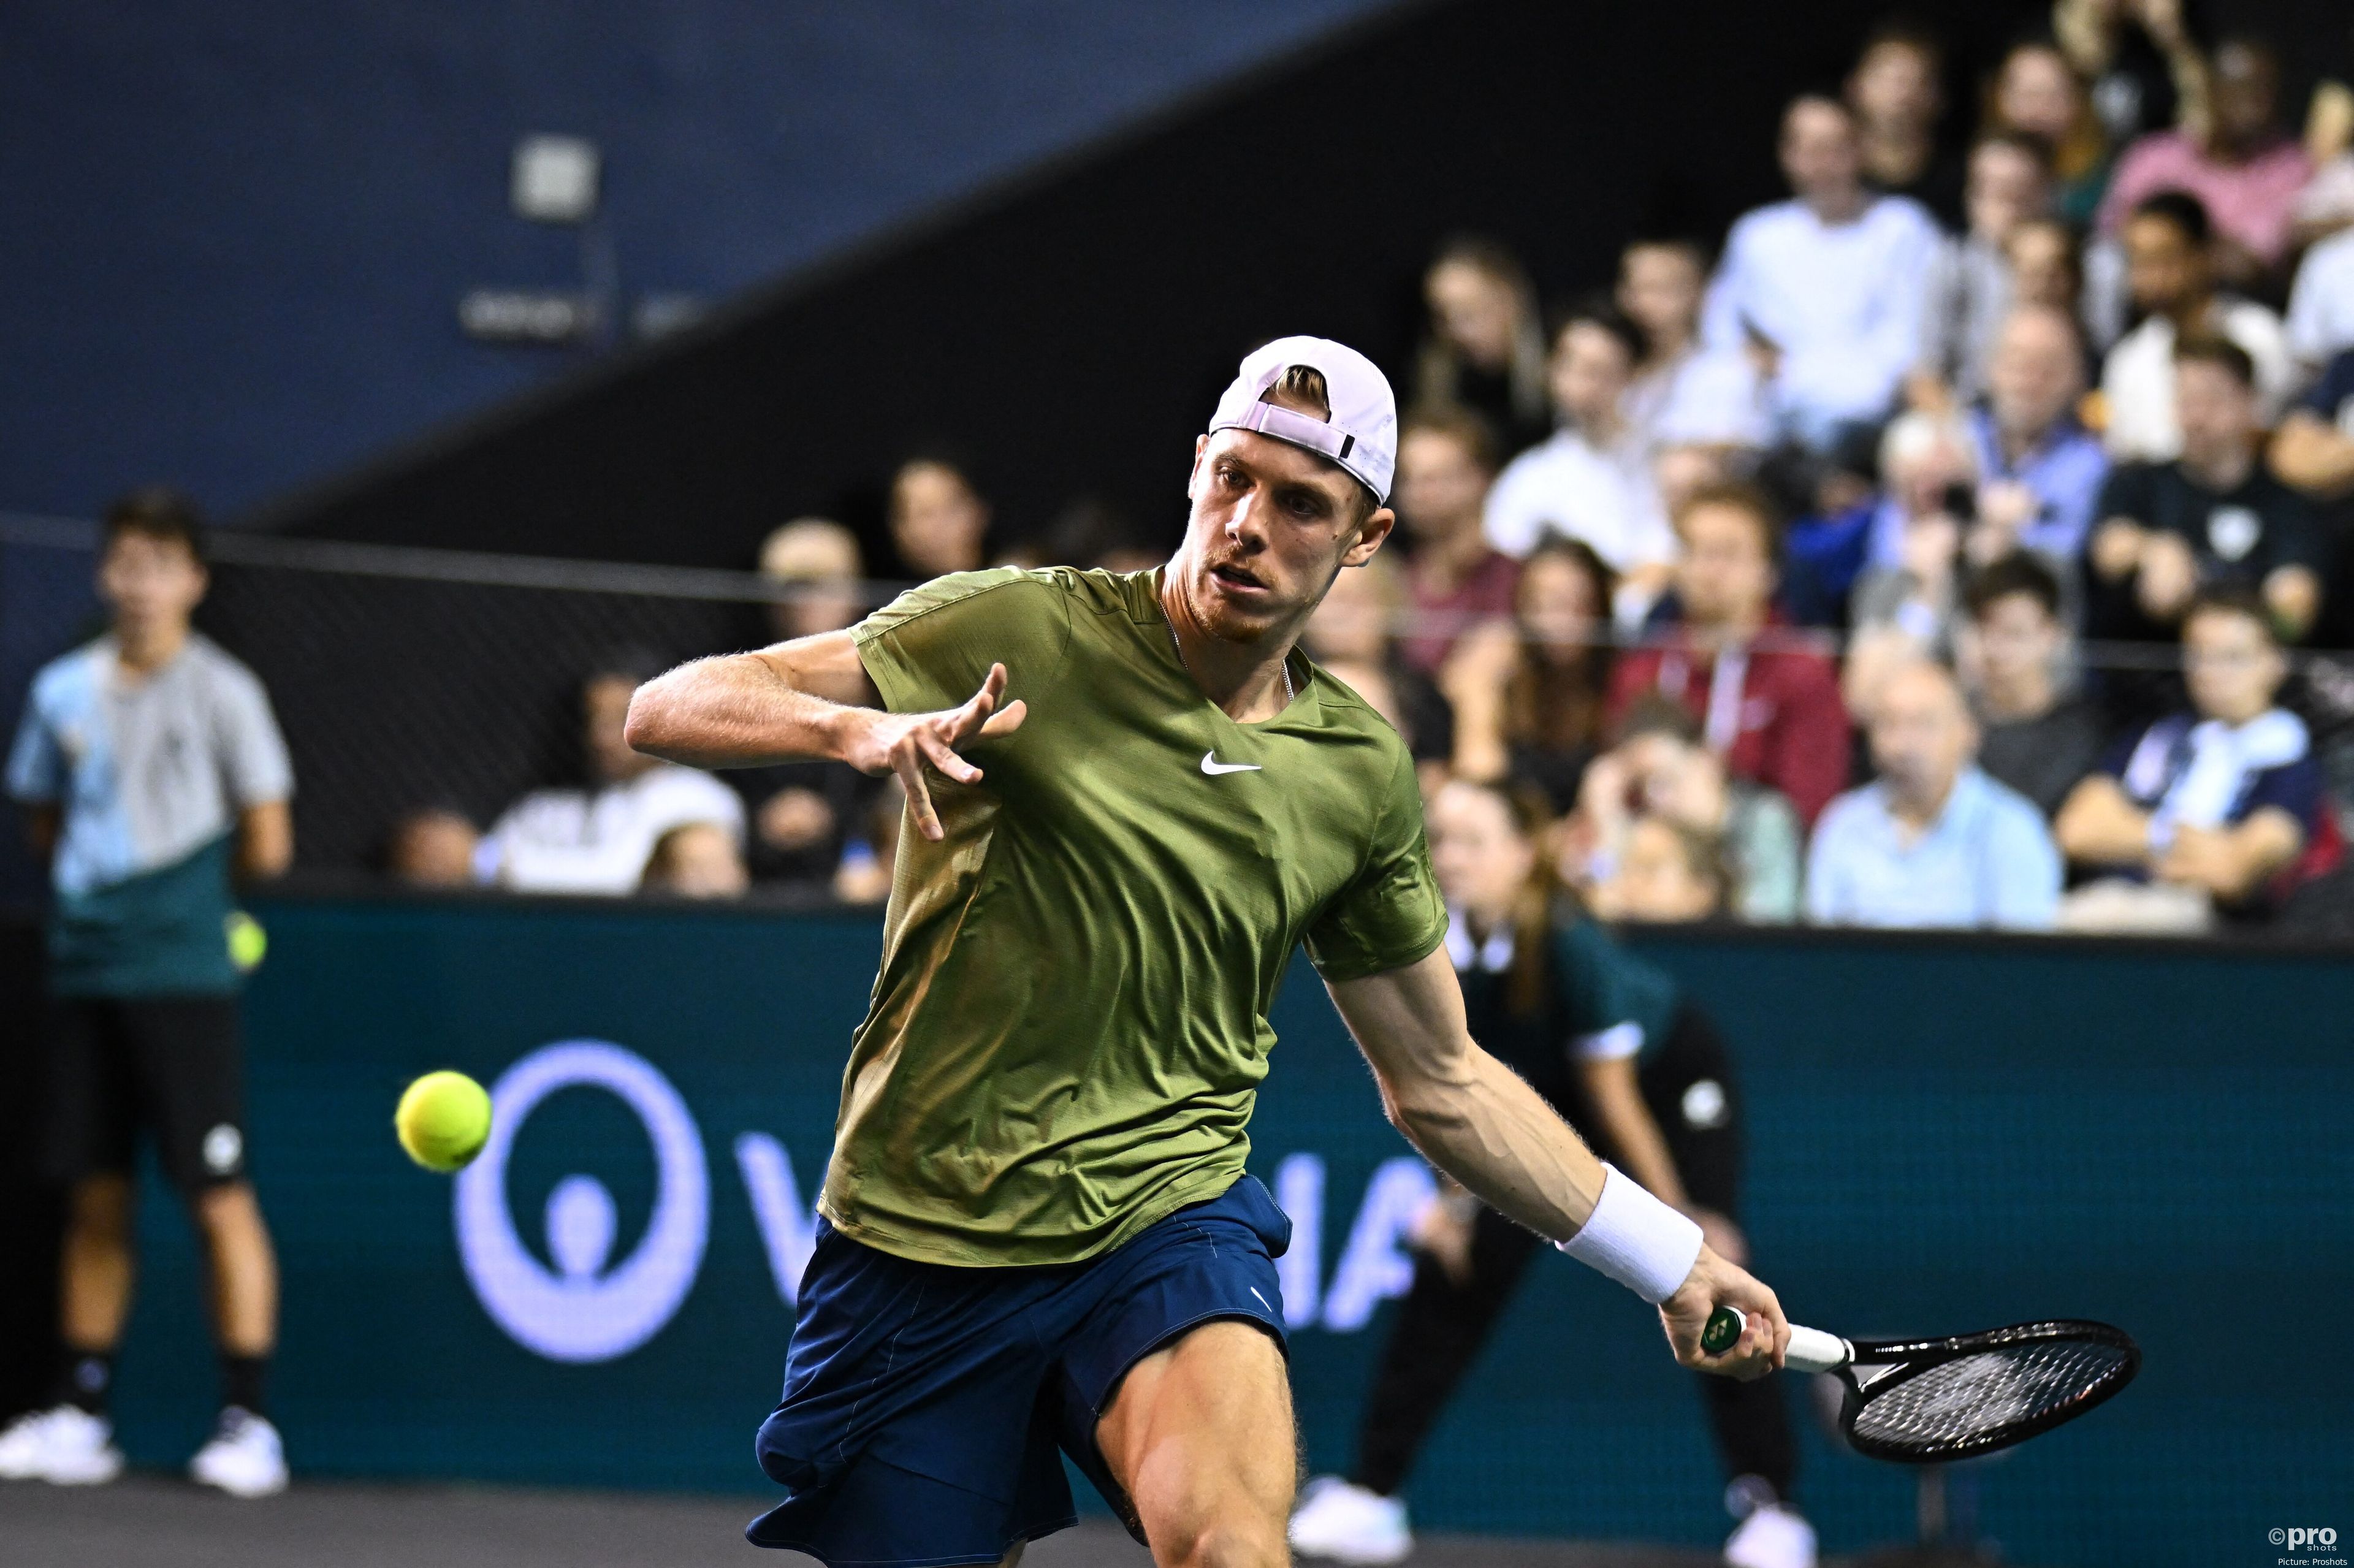 Denis Shapovalov produces superb win over Nicolas Jarry in one of the top wins of the day.